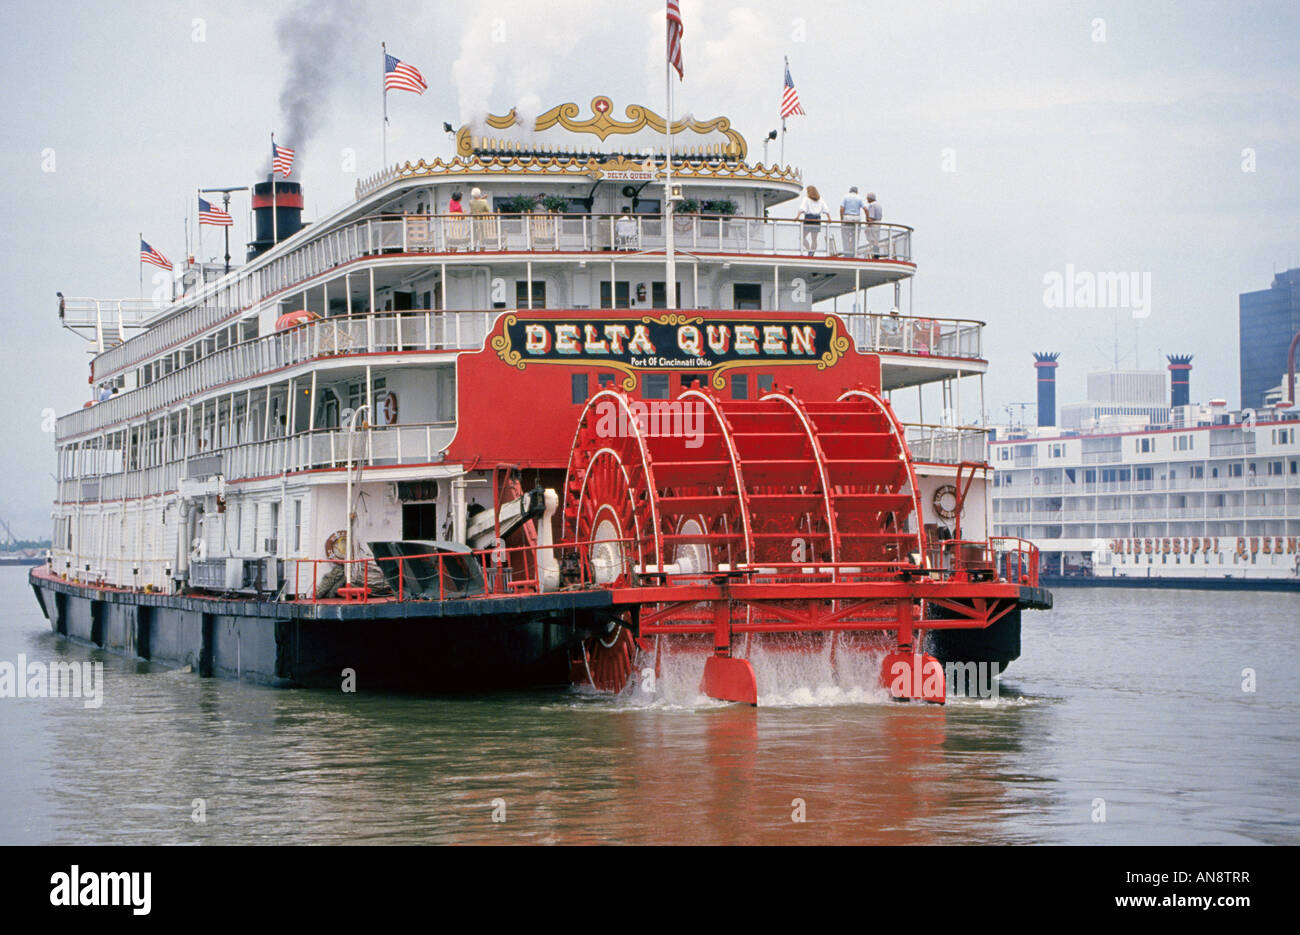 USA LOUISIANA A view of the paddlewheel steamboat Delta Queen on the Mississippi River near Baton Rouge Stock Photo